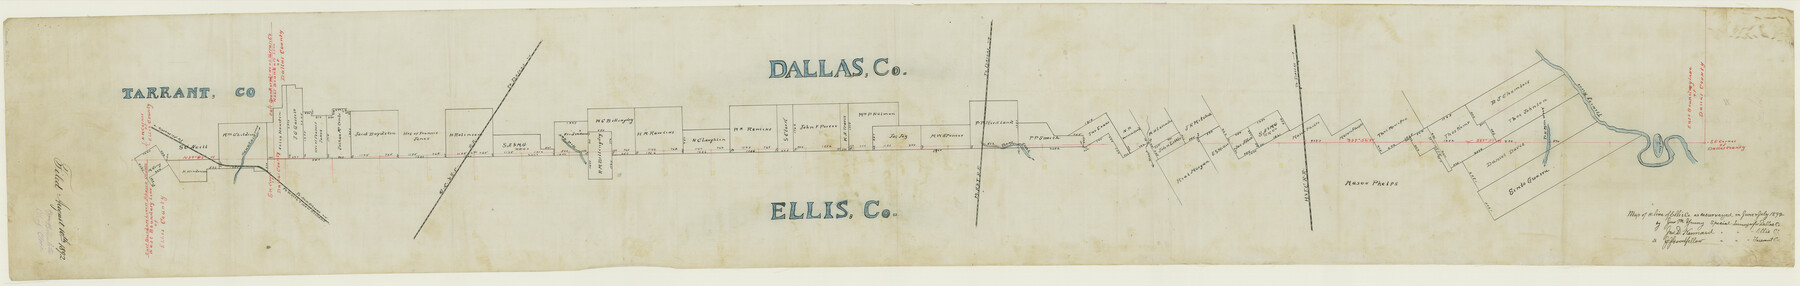 52160, Dallas County Boundary File 5, General Map Collection